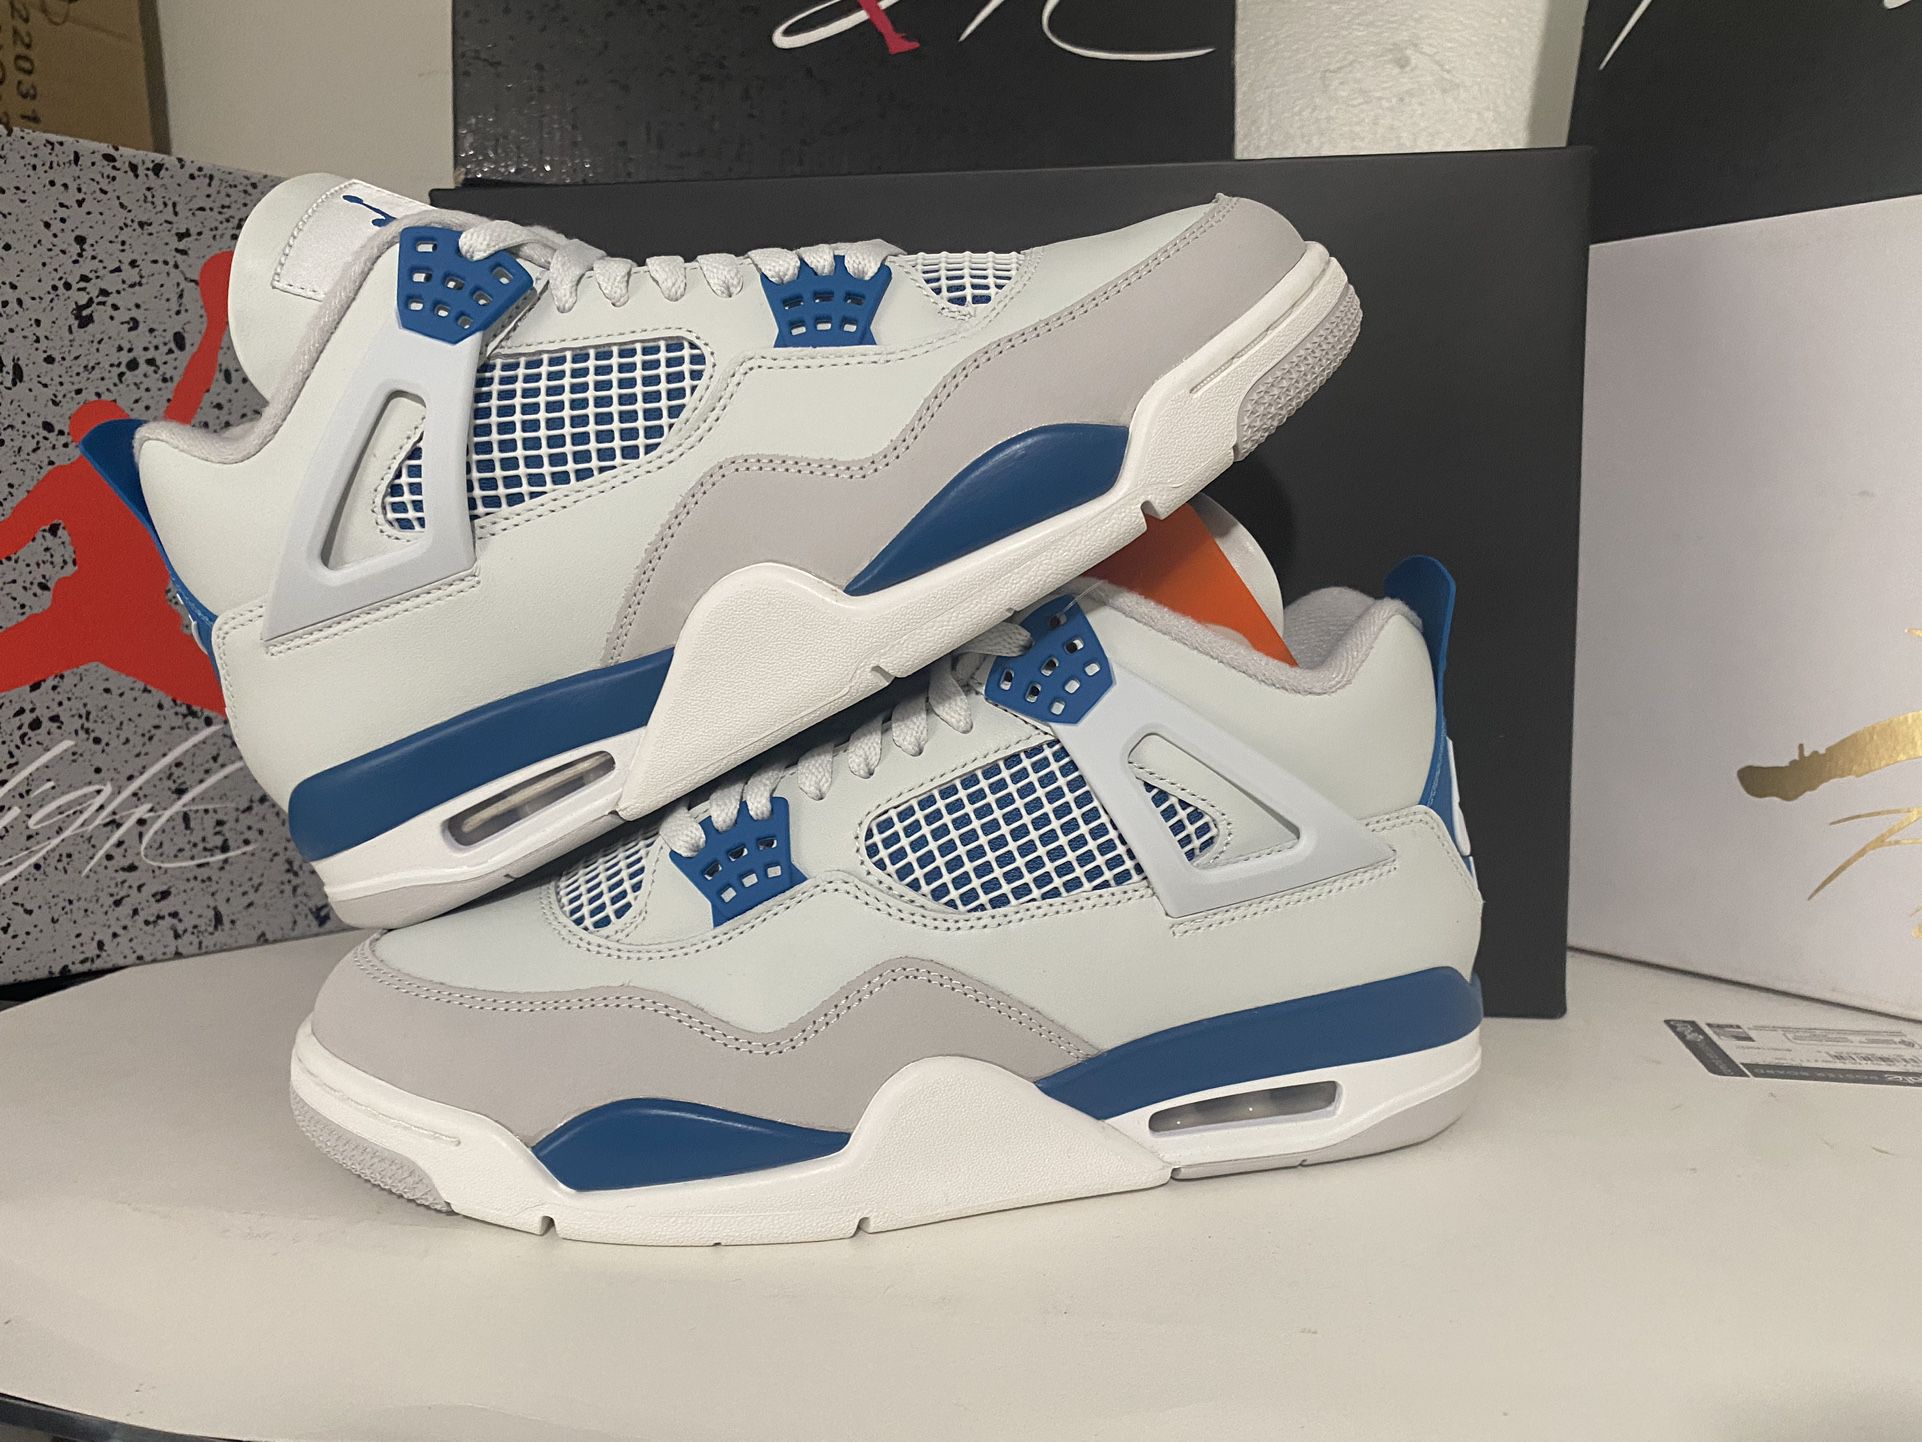 Air Jordan 4 Retro Military Blue size 10M ( pick up only ) $250 Firm